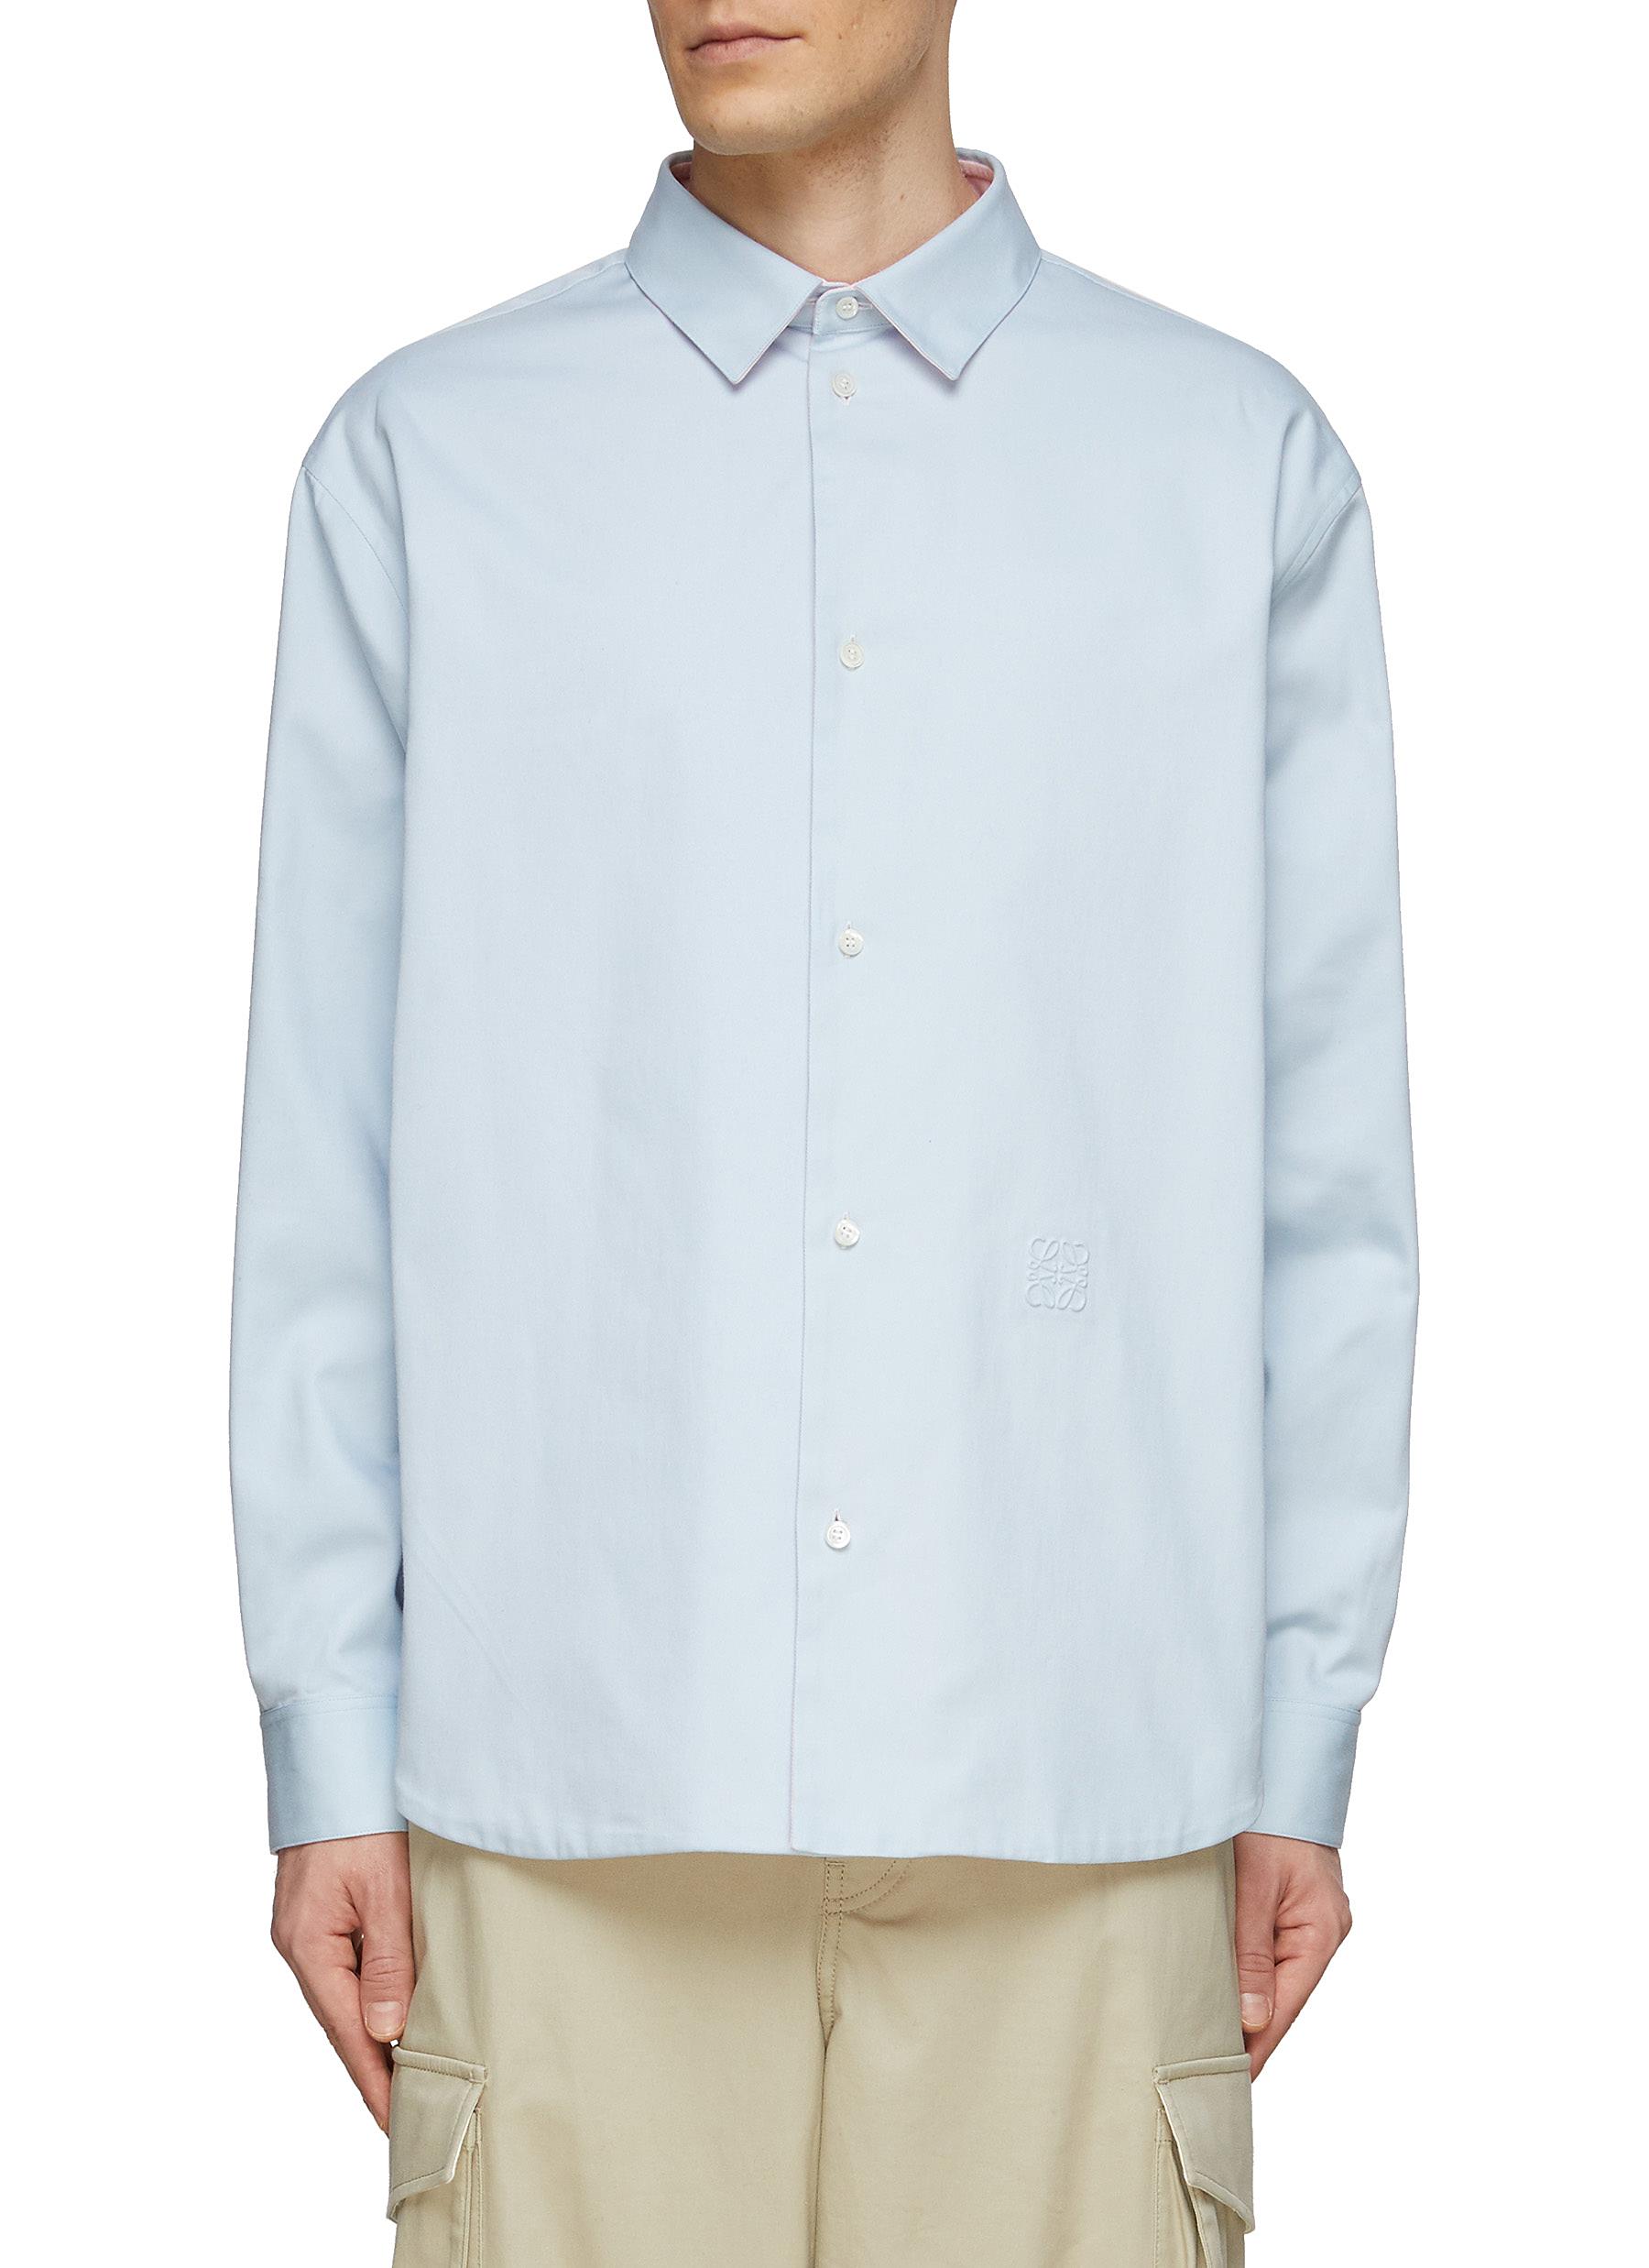 REVERSIBLE ANAGRAM EMBOSSED COTTON BUTTON UP SHIRT